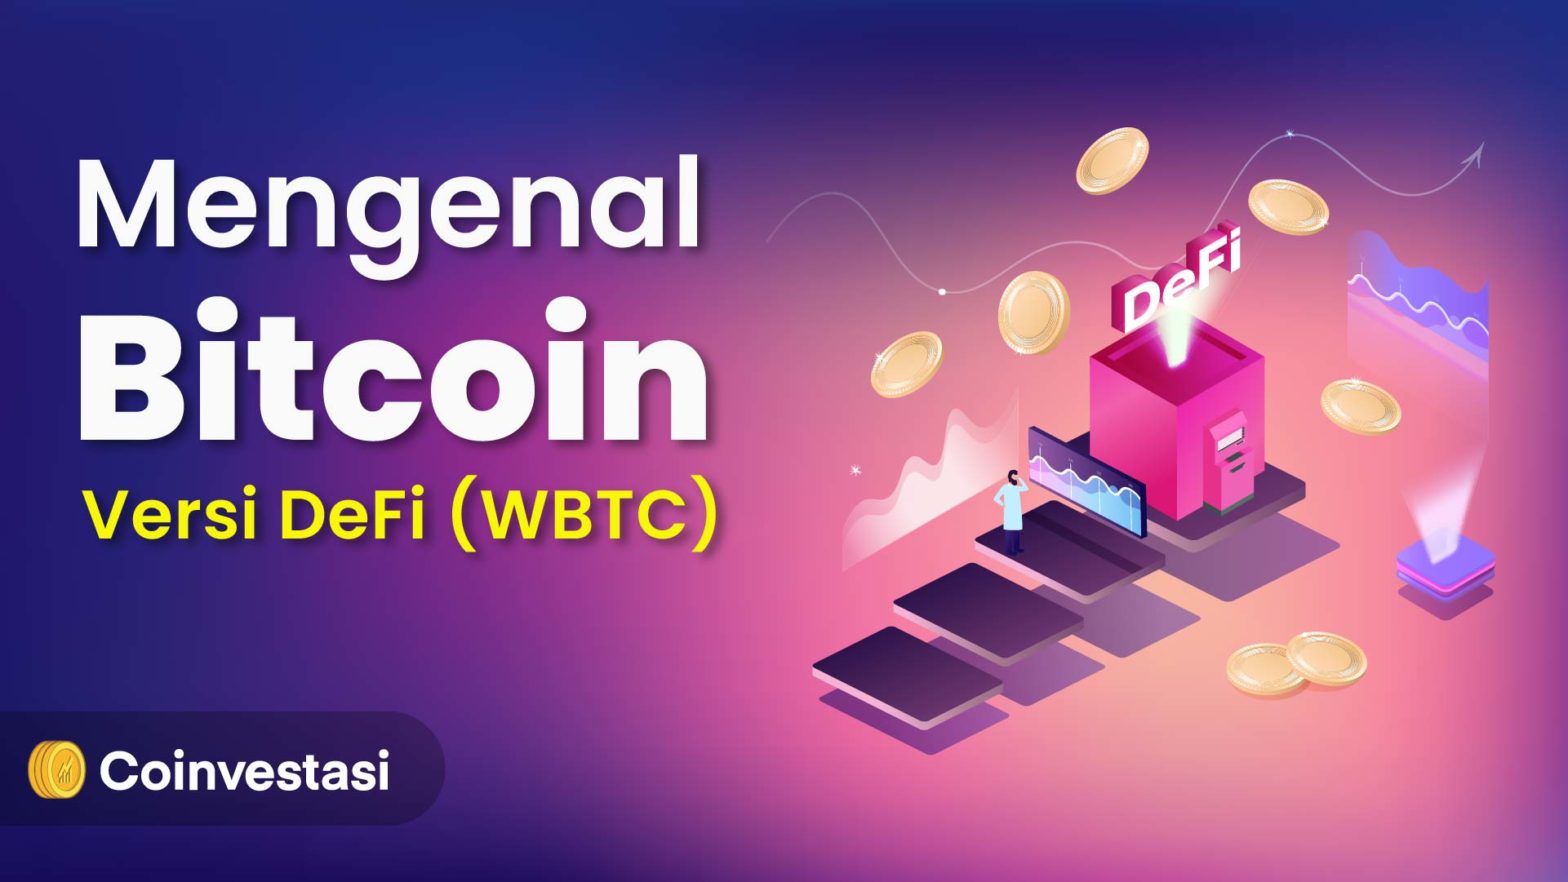 New instant airdrop 50 Wrapped Bitcoin $WBTC tokens